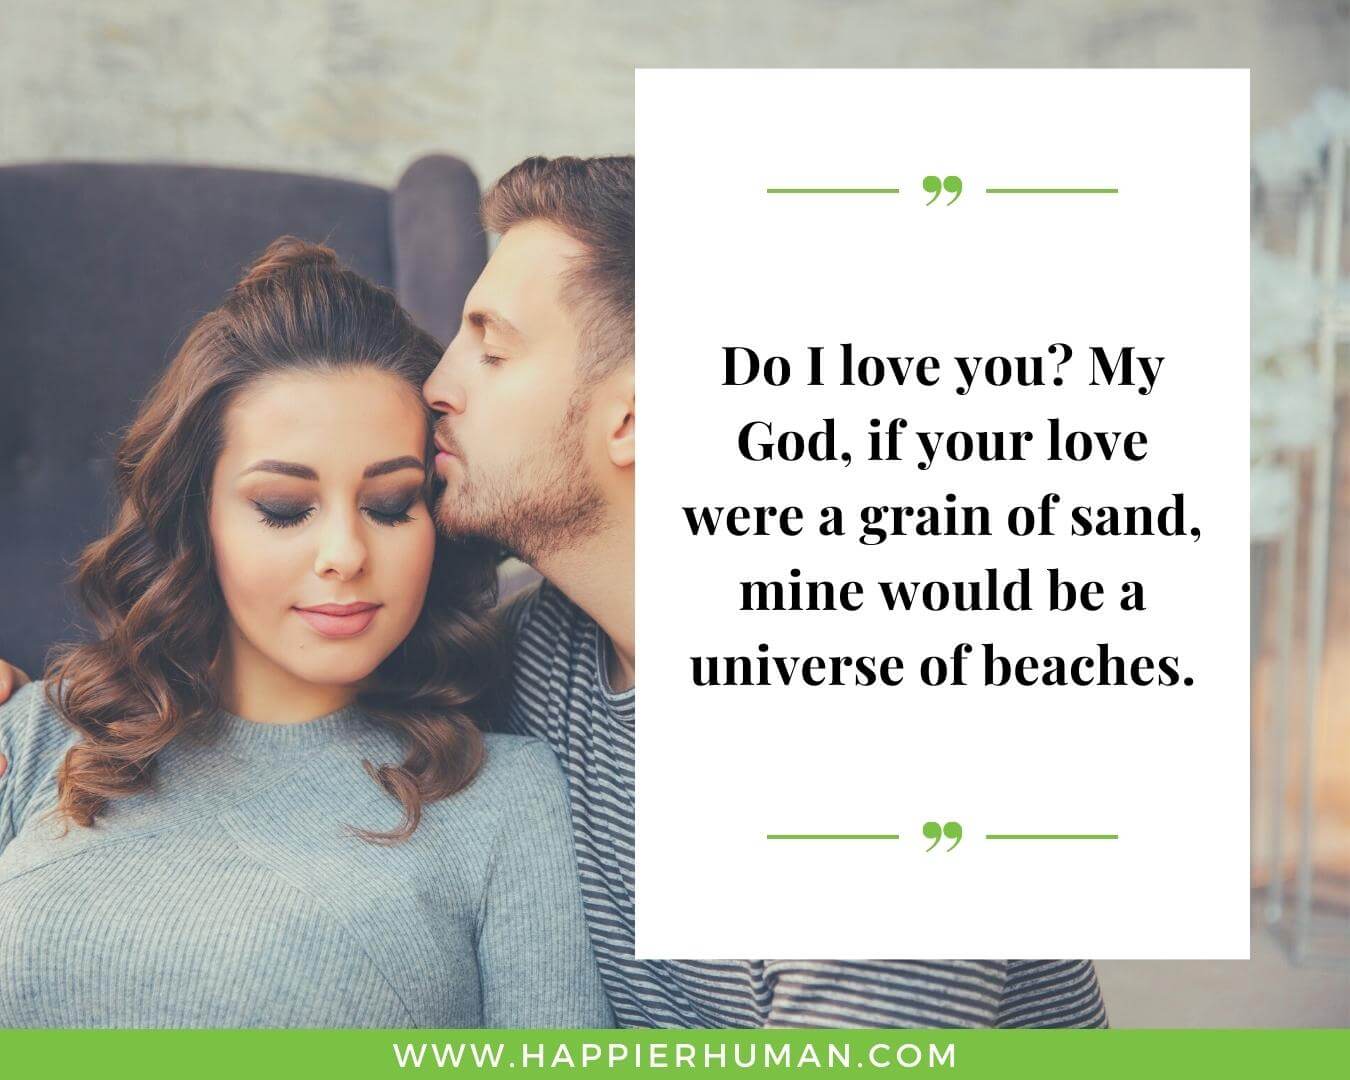 Unconditional Love Quotes for Her - “Do I love you? My God, if your love were a grain of sand, mine would be a universe of beaches.”